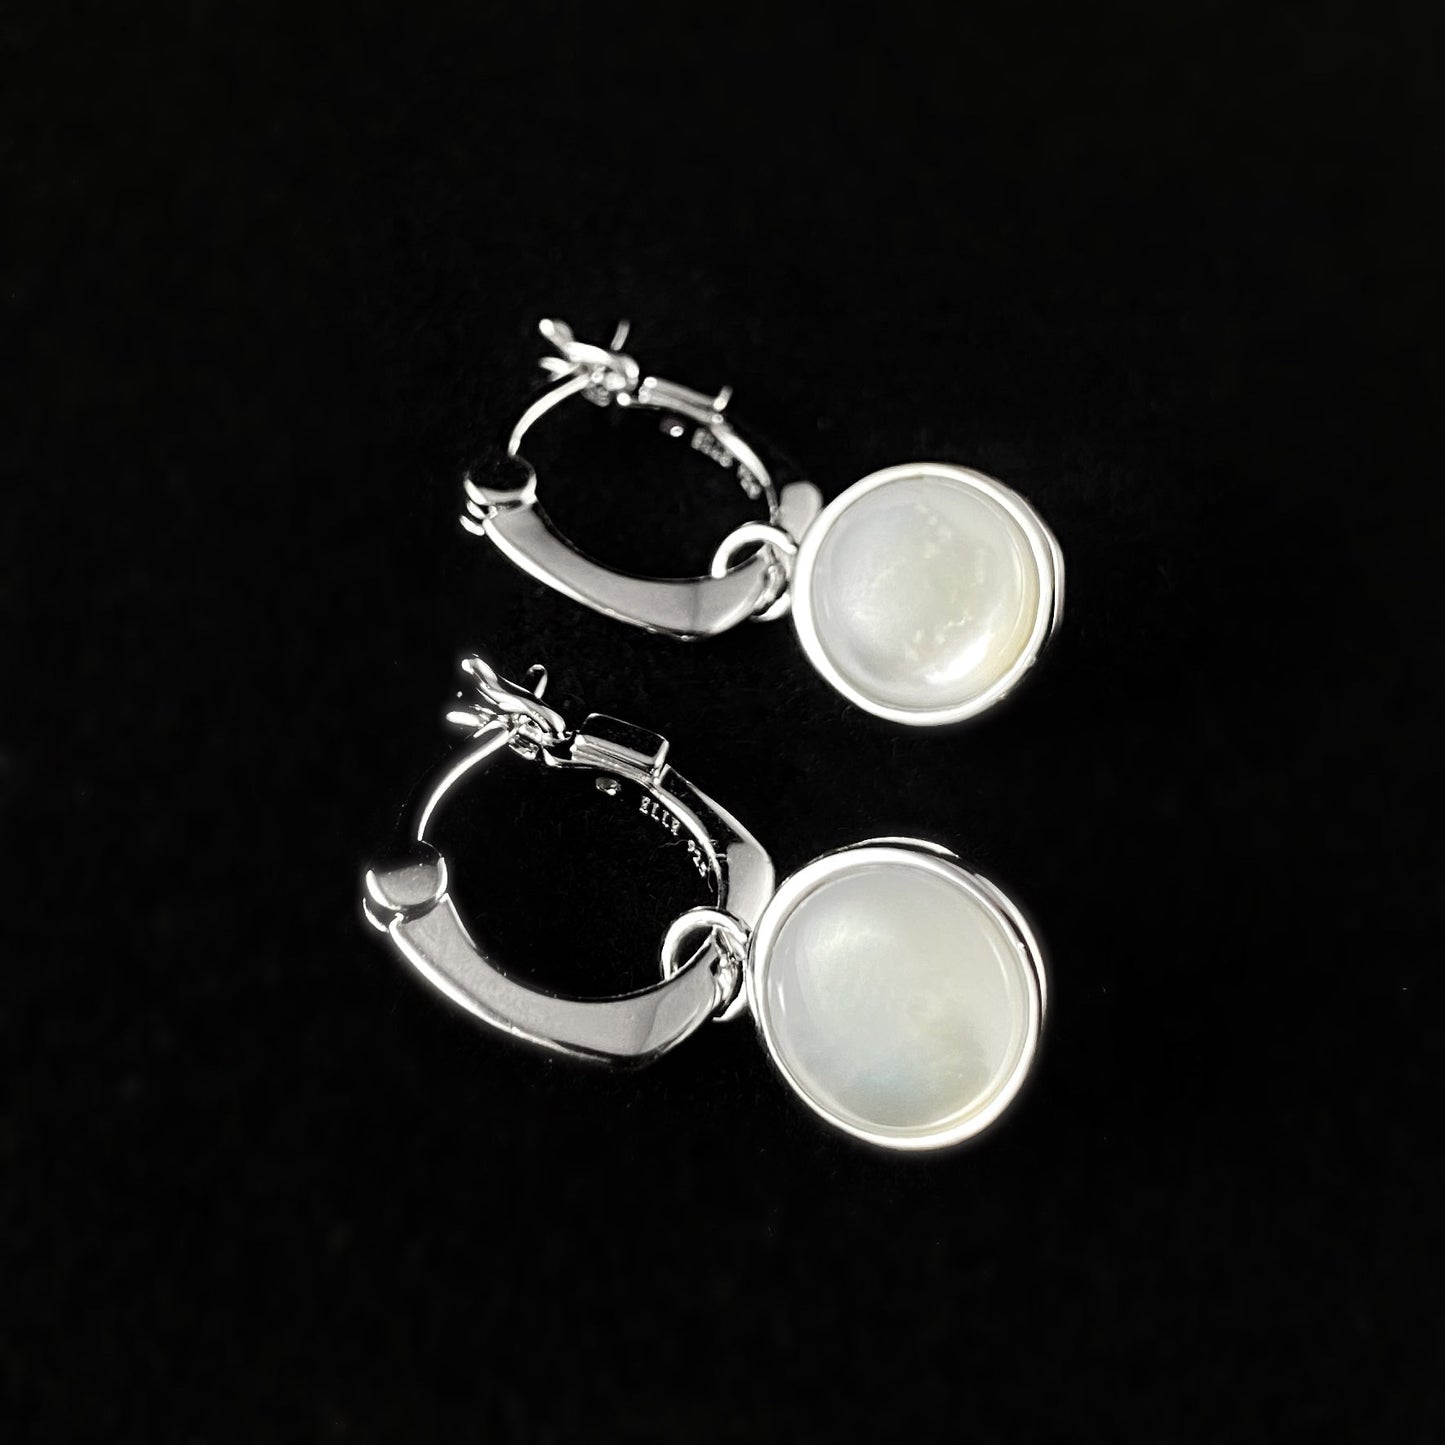 925 Sterling Silver and Mother of Pearl Drop Earrings - Elle